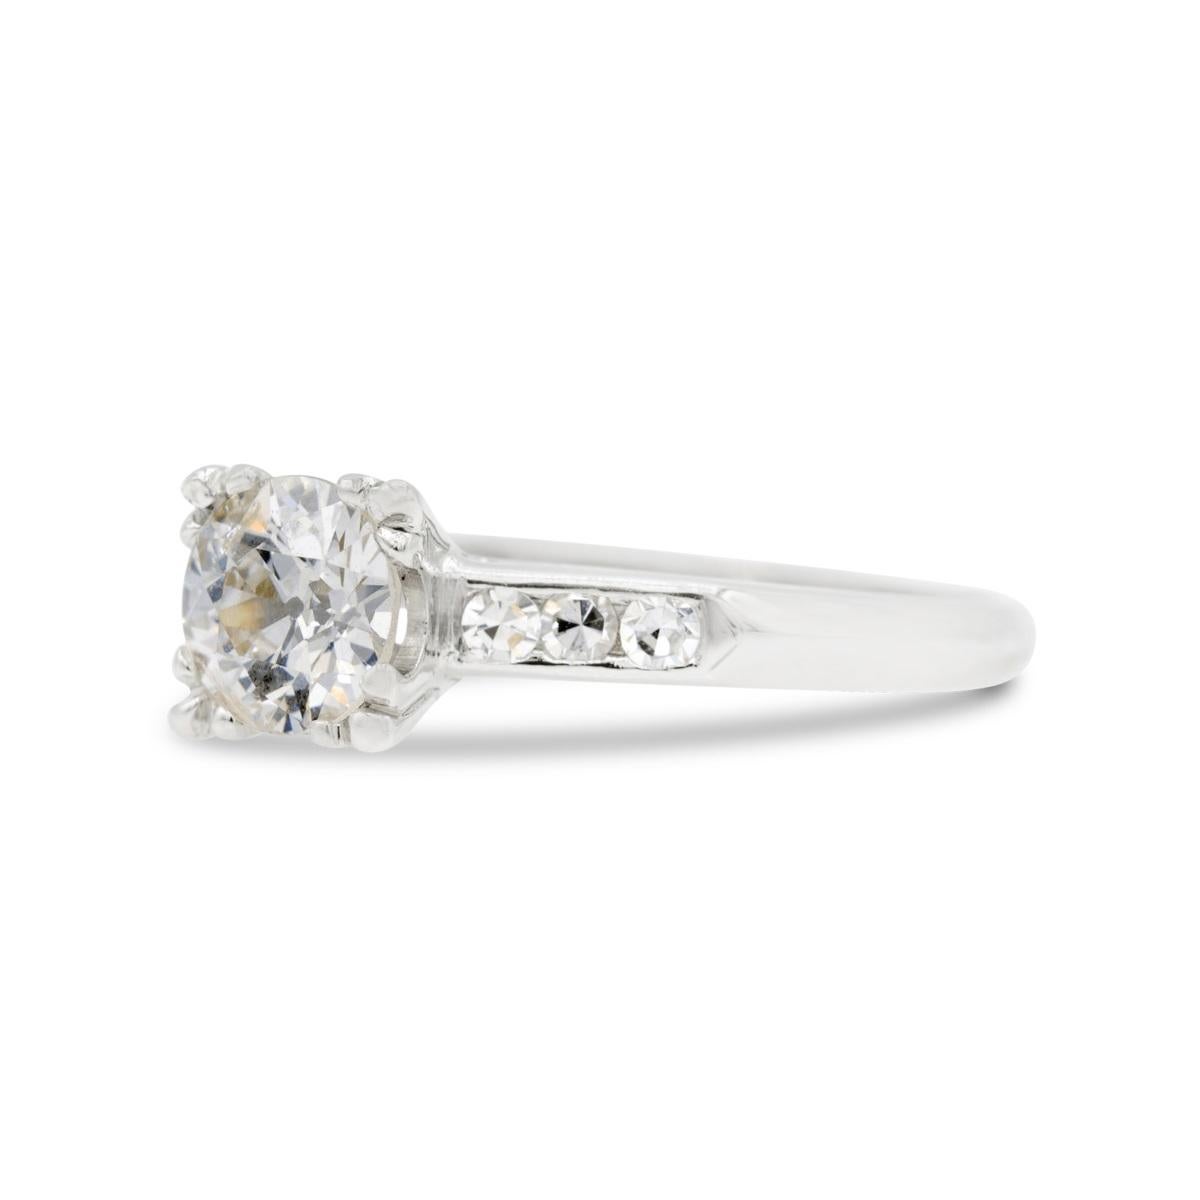 Platinum, knifes edge shank, fishtail art deco prongs. So classic. And we really love the 1.10 old European diamond at the center of this. A delightfully sparkling diamond with all the antique diamond traits we love; small table facet, prominent